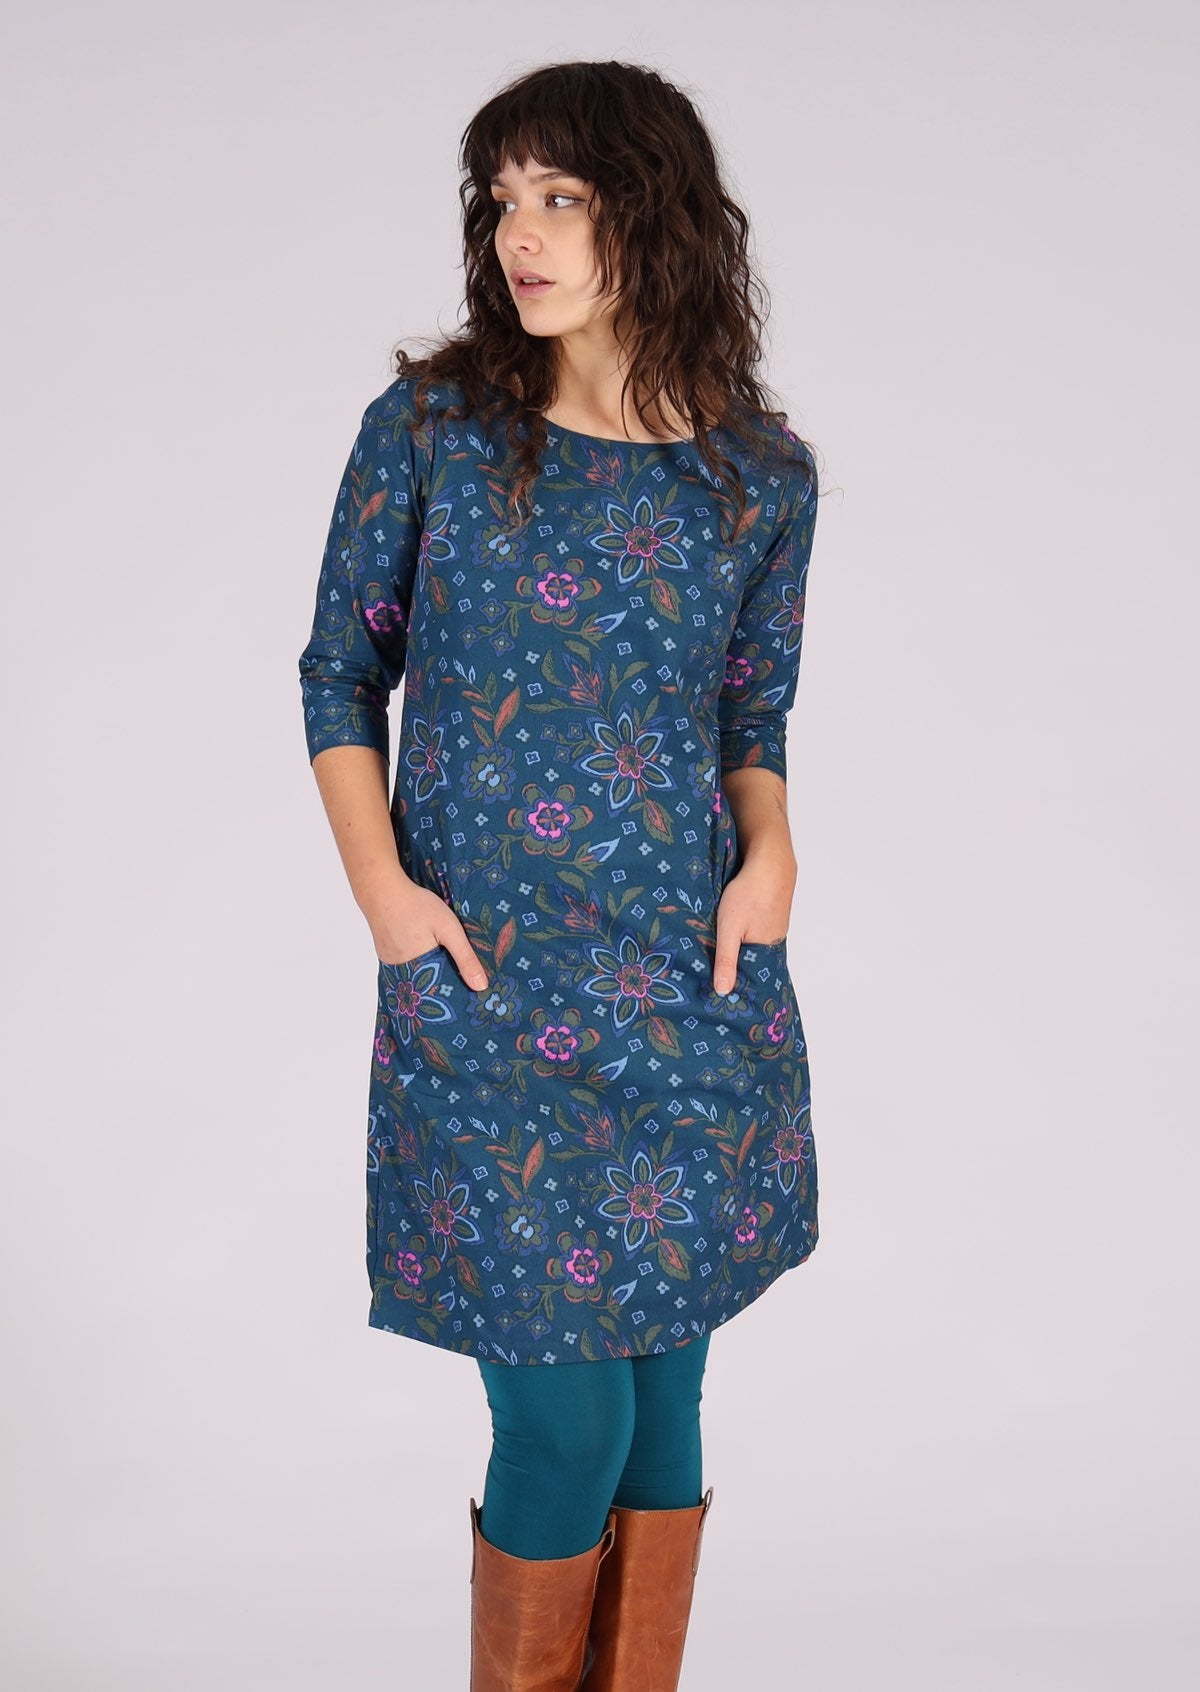 woman wearing navy floral long sleeve tunic dress with hands in pockets